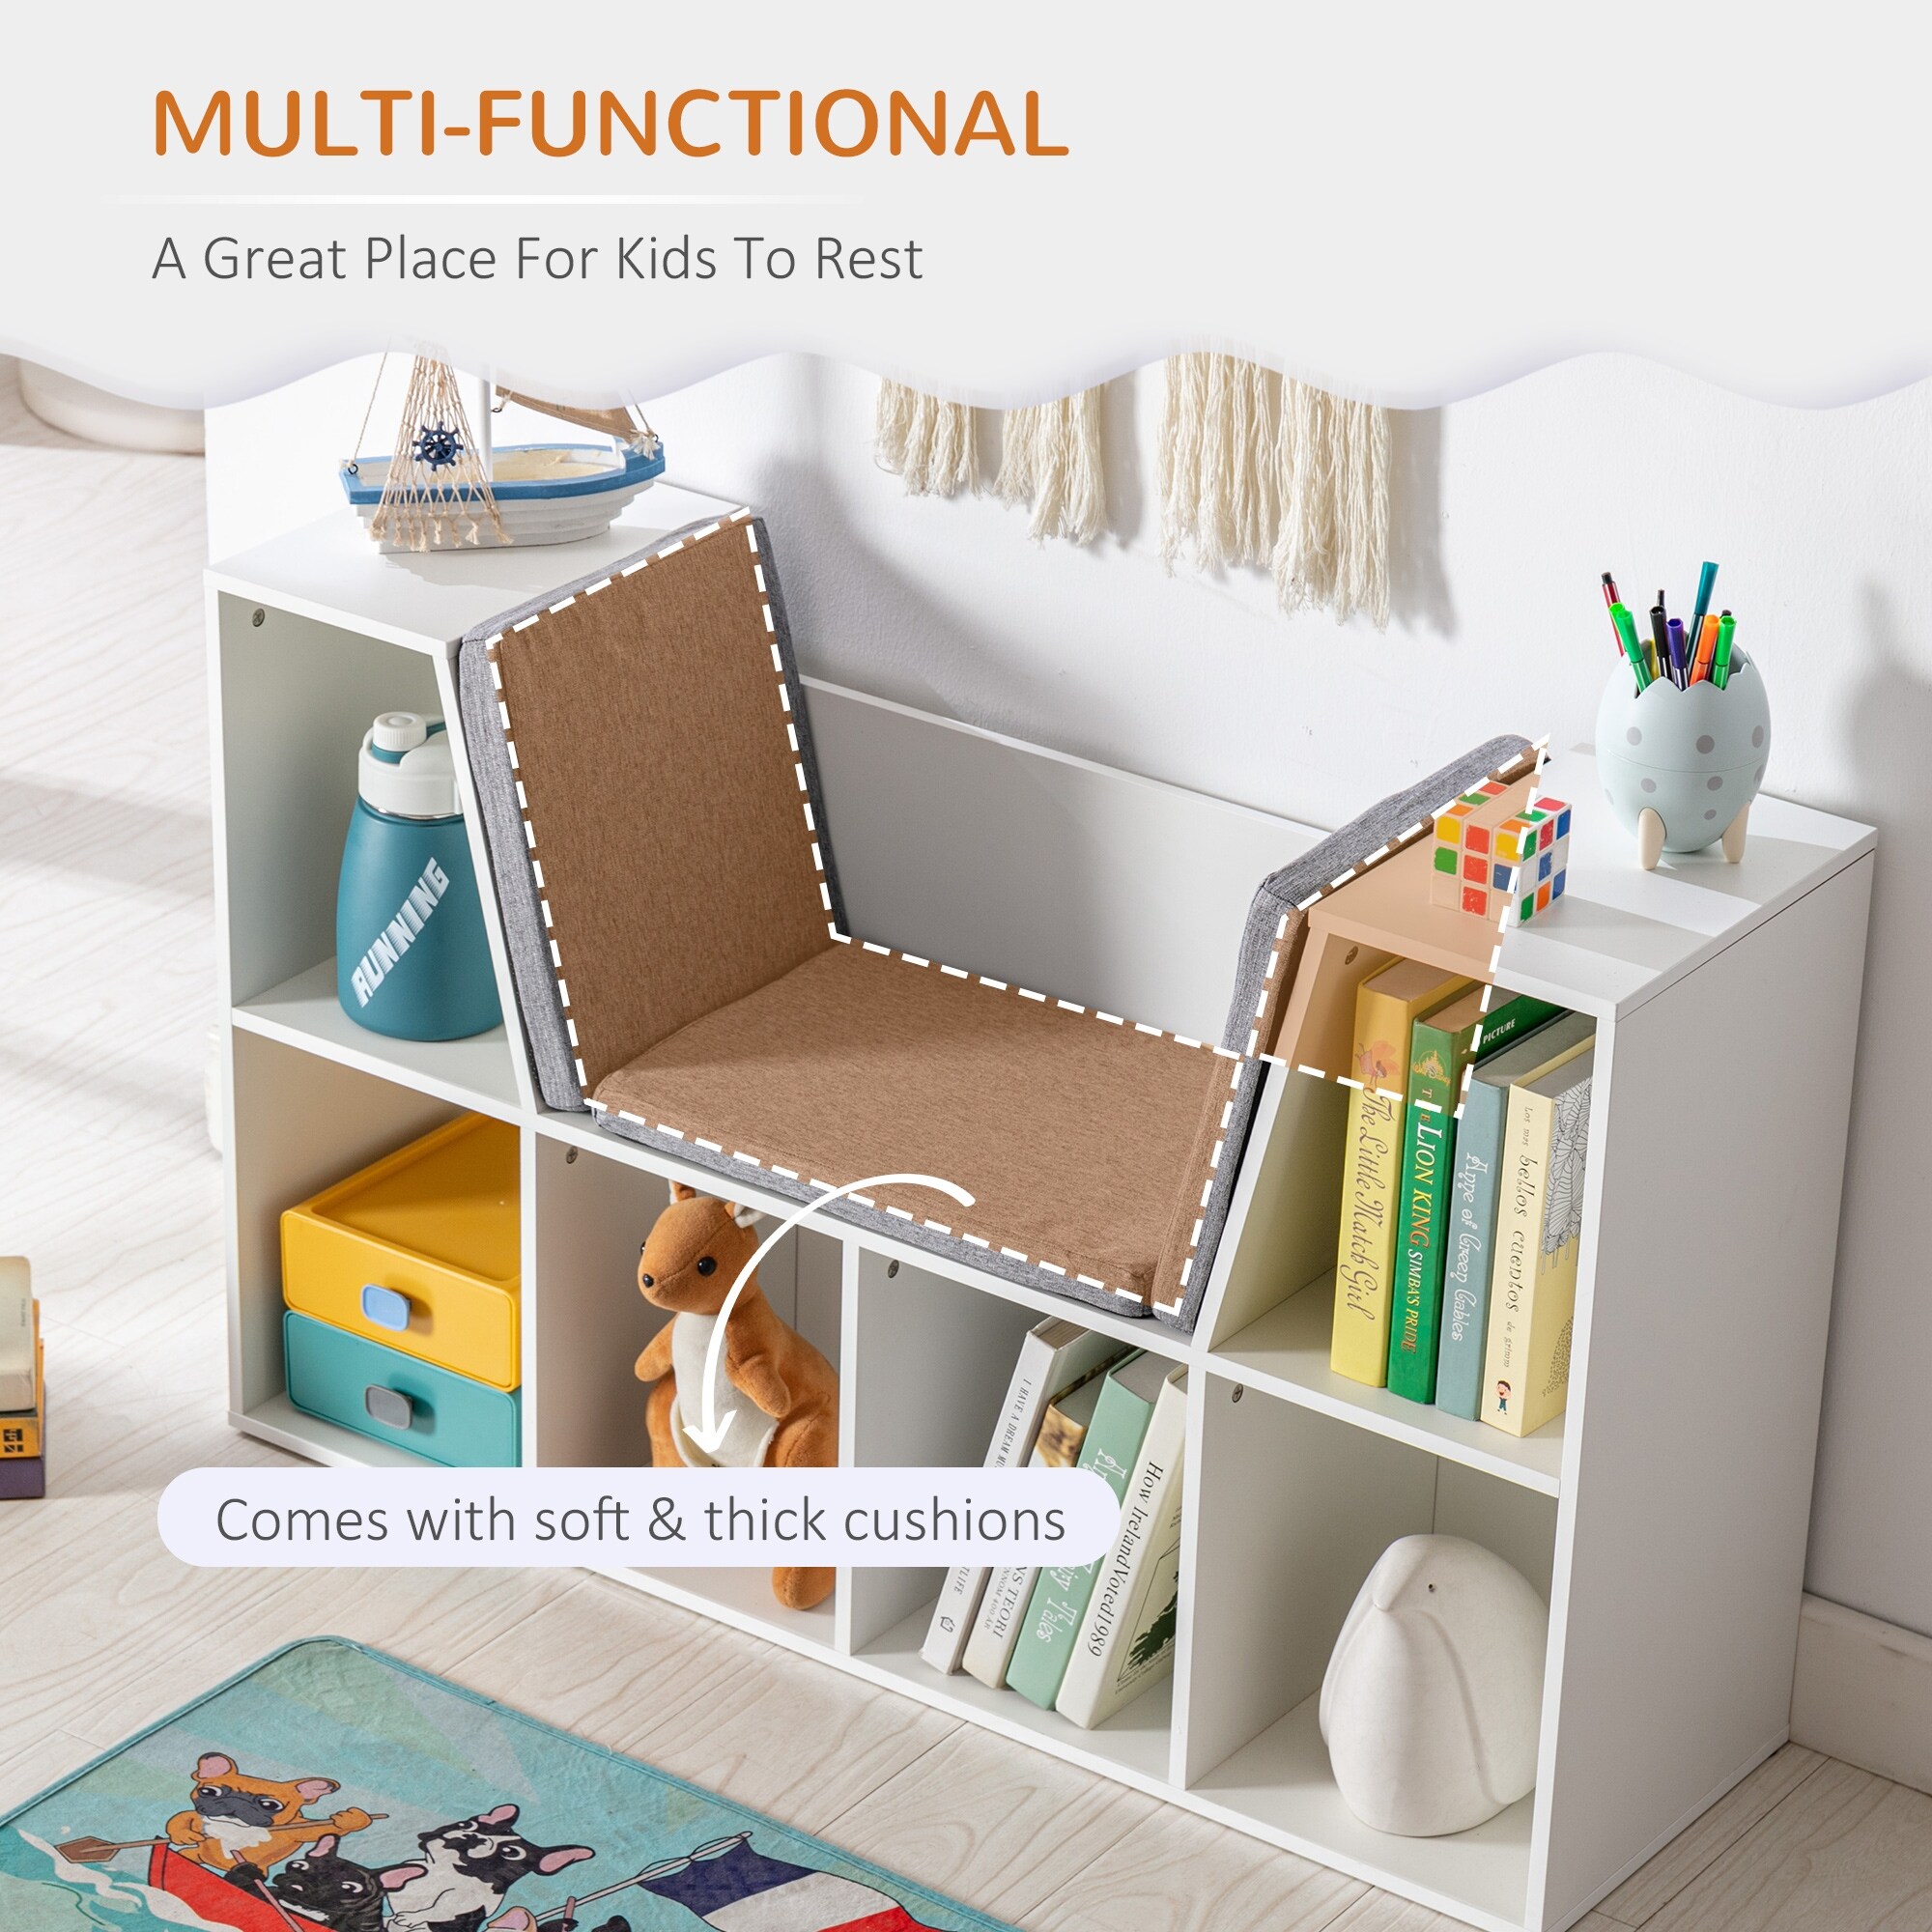 https://ak1.ostkcdn.com/images/products/is/images/direct/45cfd587f7ac701049d62221ff01130a6102d07a/HOMCOM-Toy-Chest-Kids-Cabinet-Storage-Organizer-Children-Display-Shelf-for-Toys-Clothes-Books-Bedroom.jpg